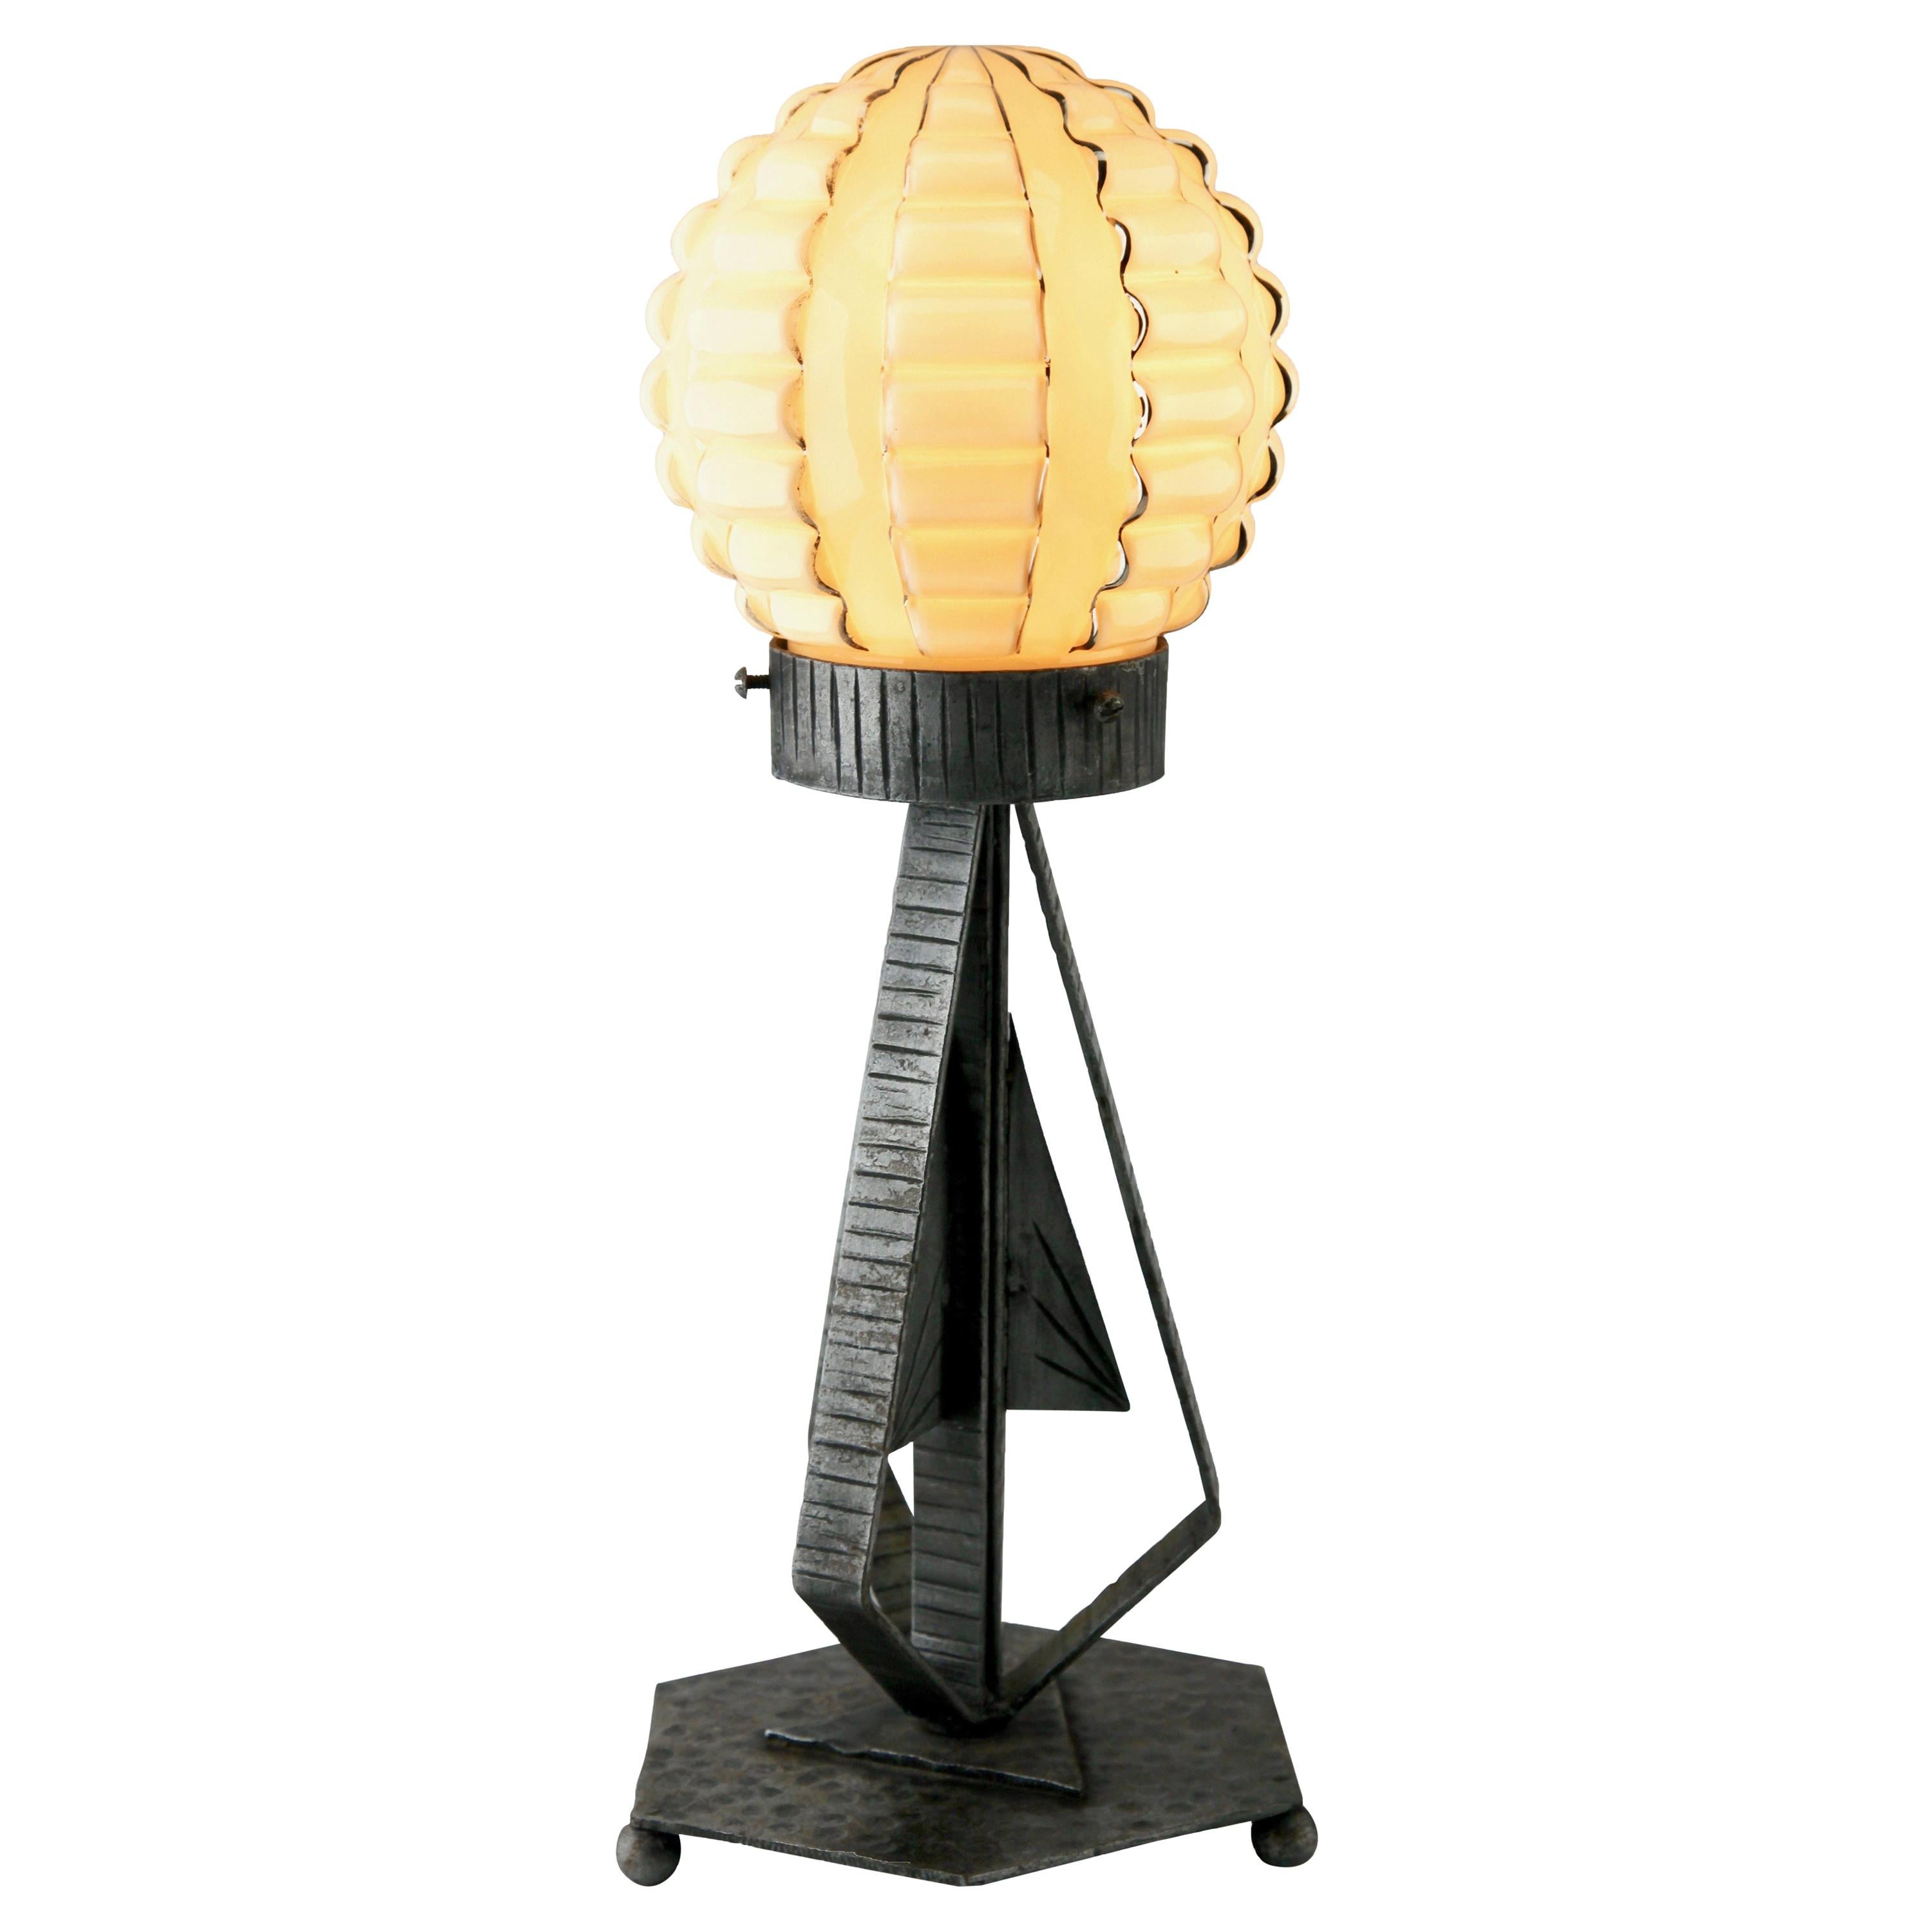 French Art Deco Lamp in Wrought Iron with Glass Shade with Golden Highlights